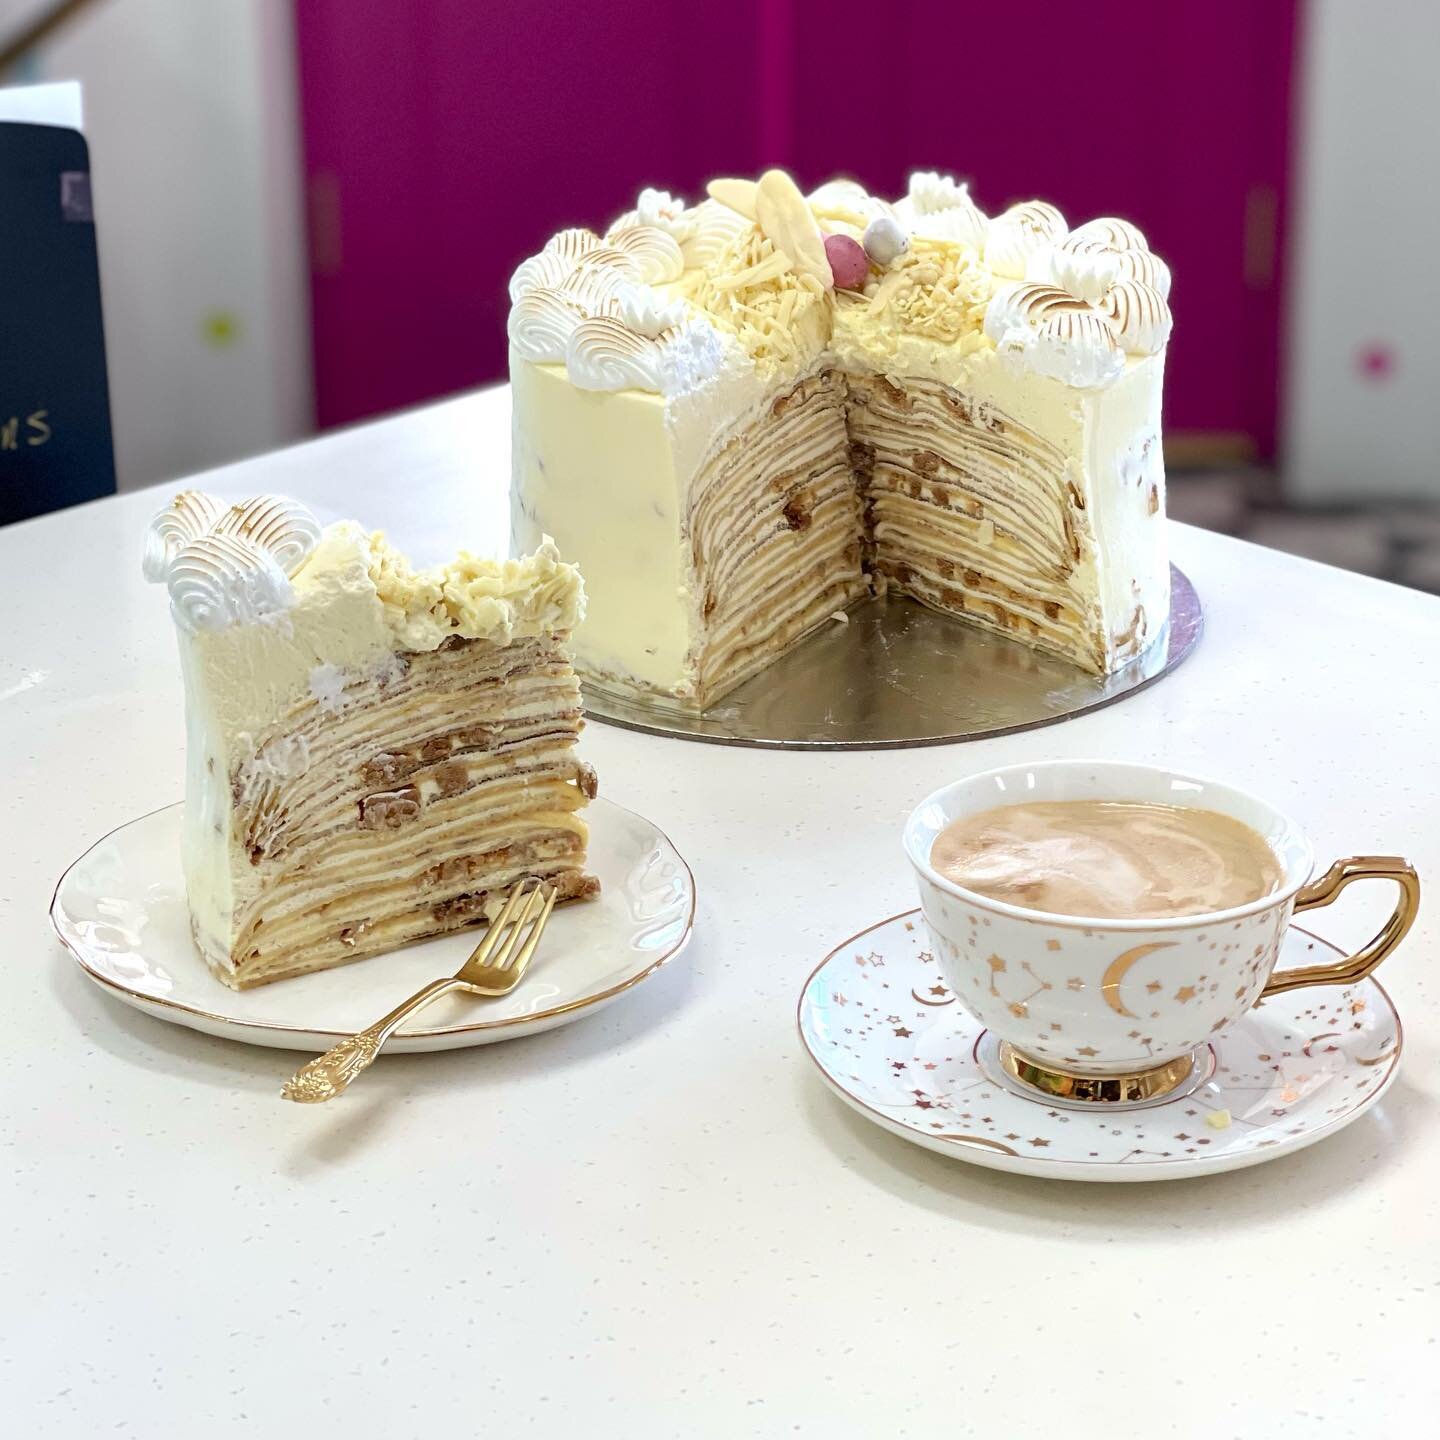 🍋🐣COMPETITION! WIN a limited edition EASTER LEMON MERINGUE PIE CREPE CAKE from @ilumafinefoods and a twin pack of our Easter Bunny Salted Caramel &amp; Milk Chocolate Petits Gateaux and an Couverture Easter Egg containing a special message from the